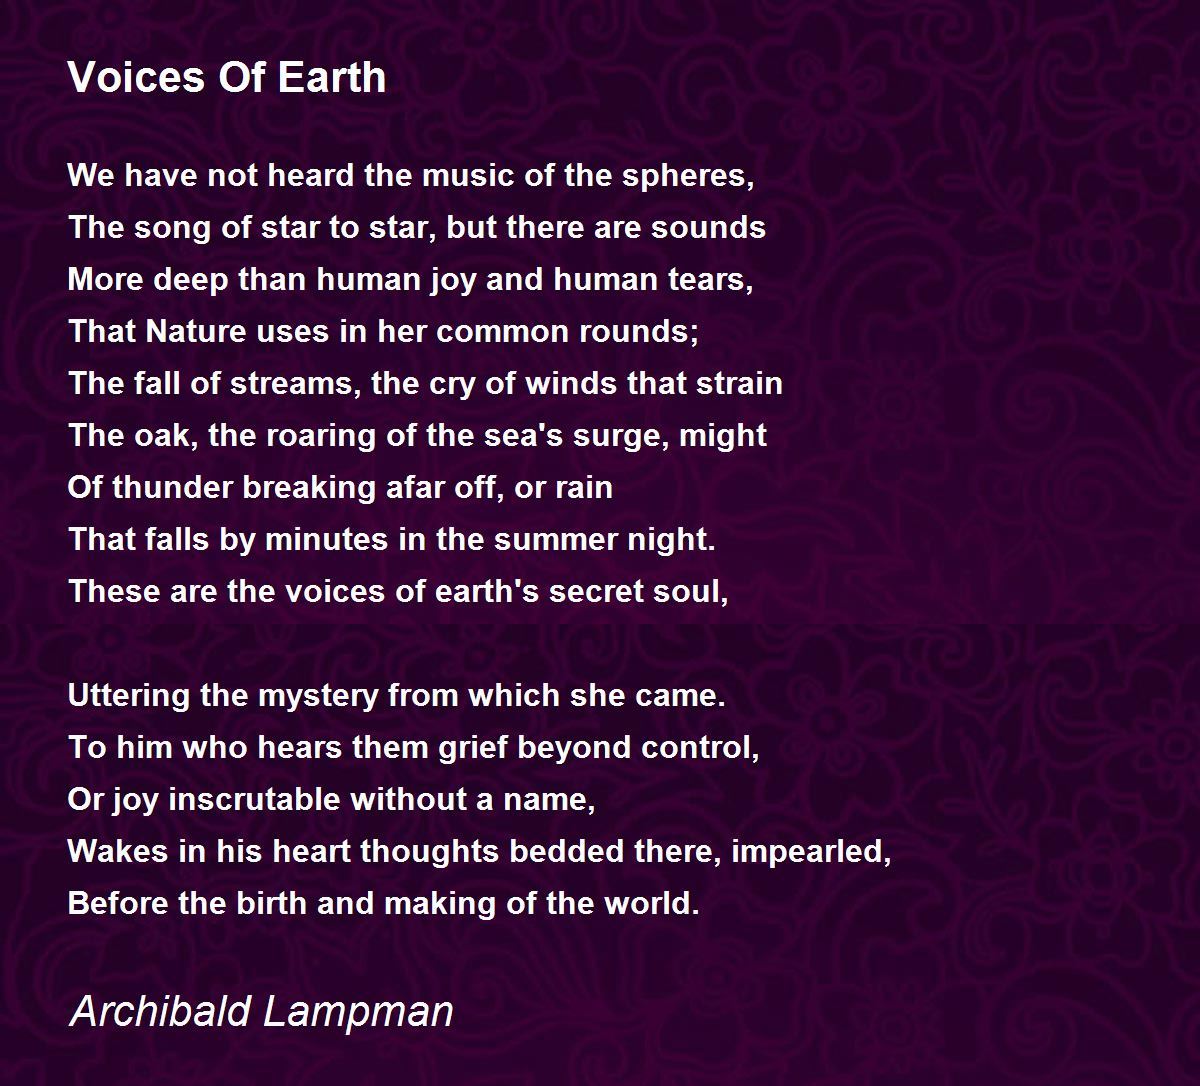 Voices Of Earth Poem by Archibald Lampman - Poem Hunter